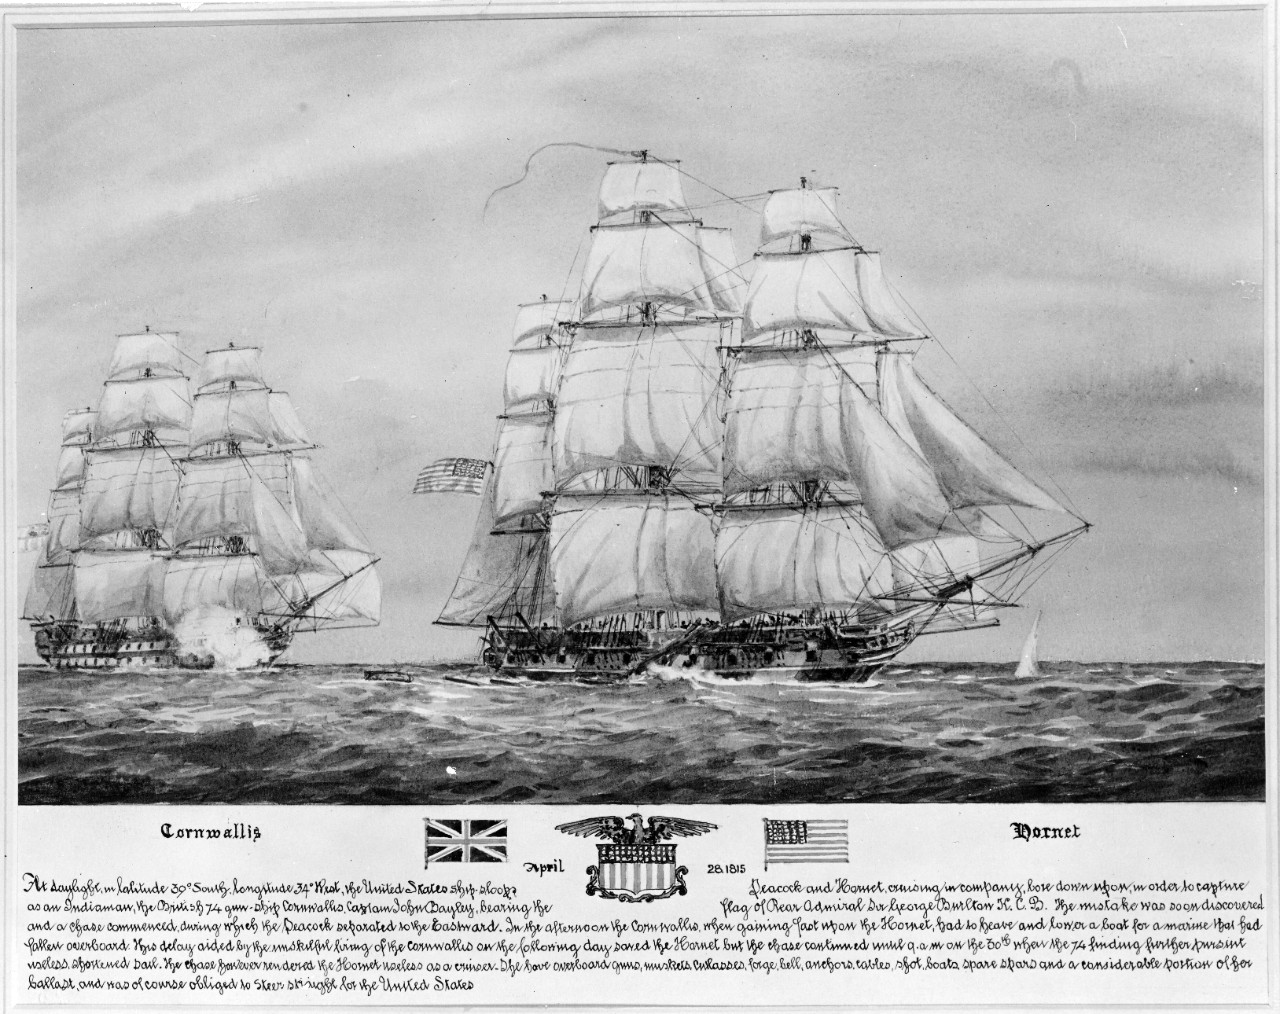 “HMS Cornwallis chases USS Hornet, April 1815”.  NHHC Photograph Collection, NH 42074. 